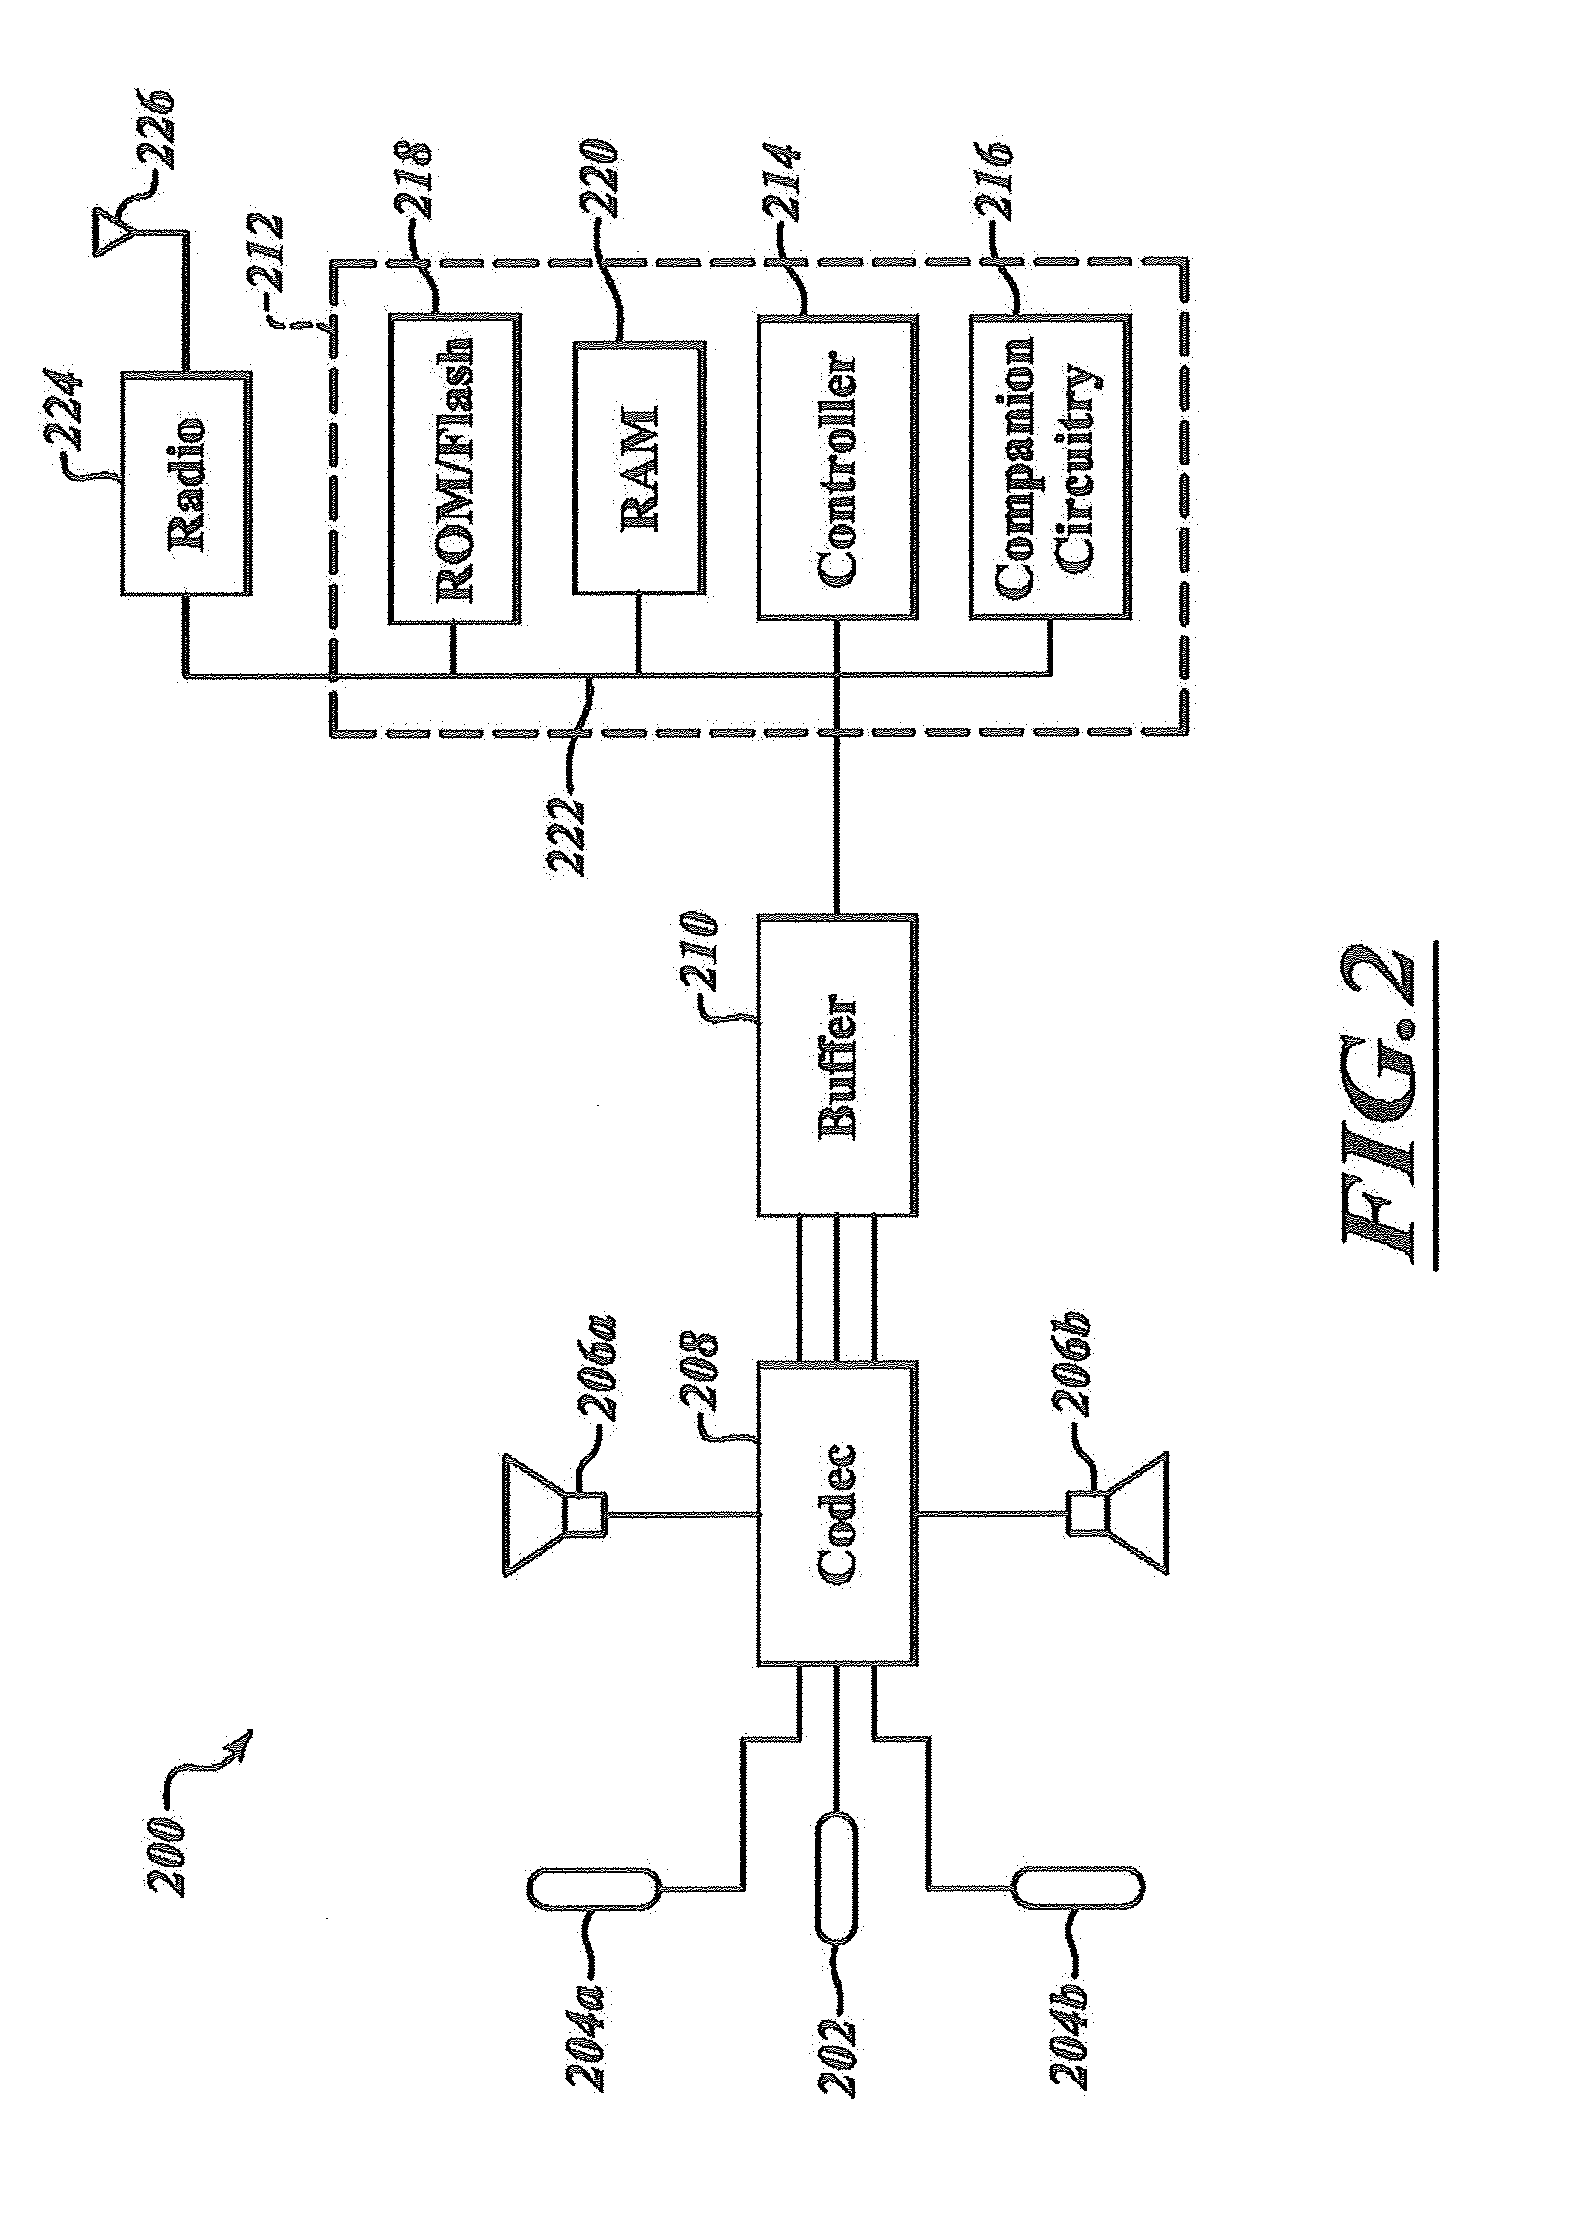 Apparatus and method to classify sound to detect speech